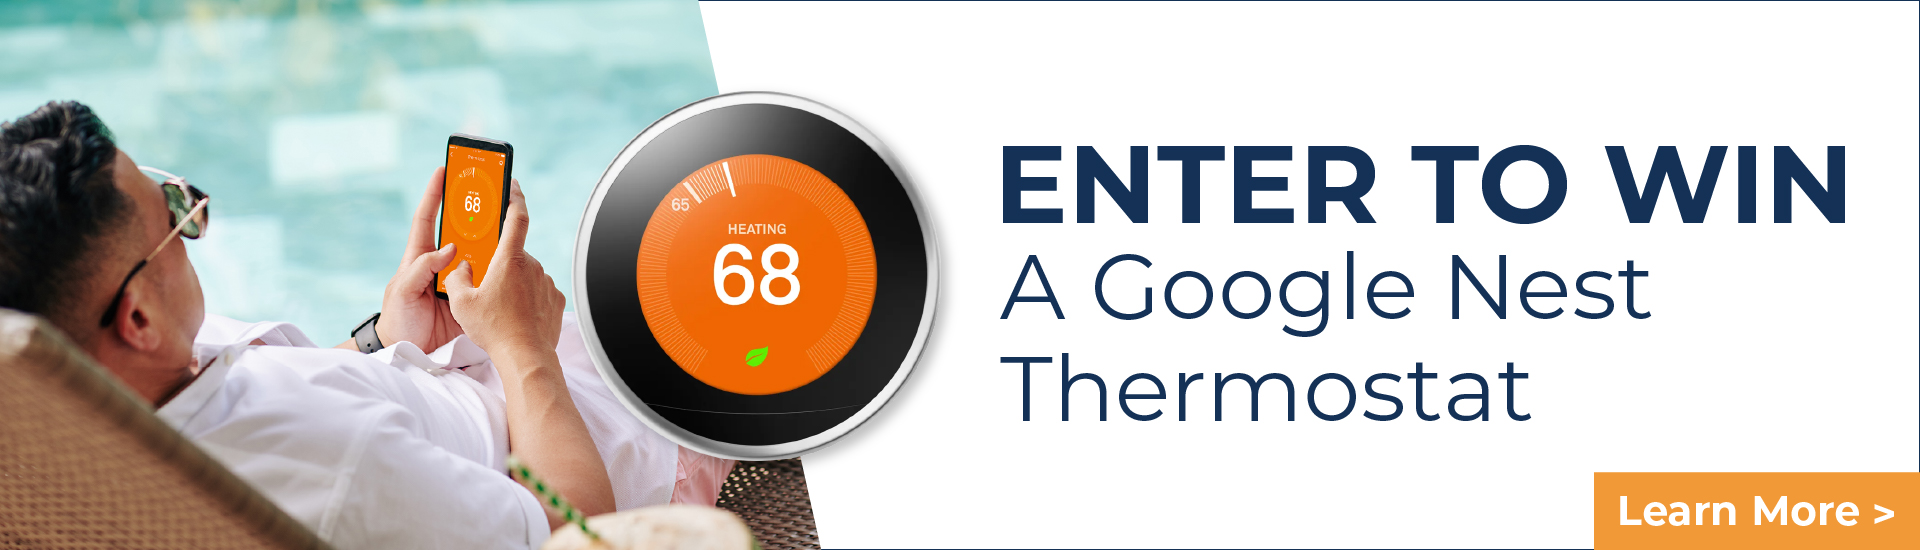 Google Nest Thermostat Giveaway